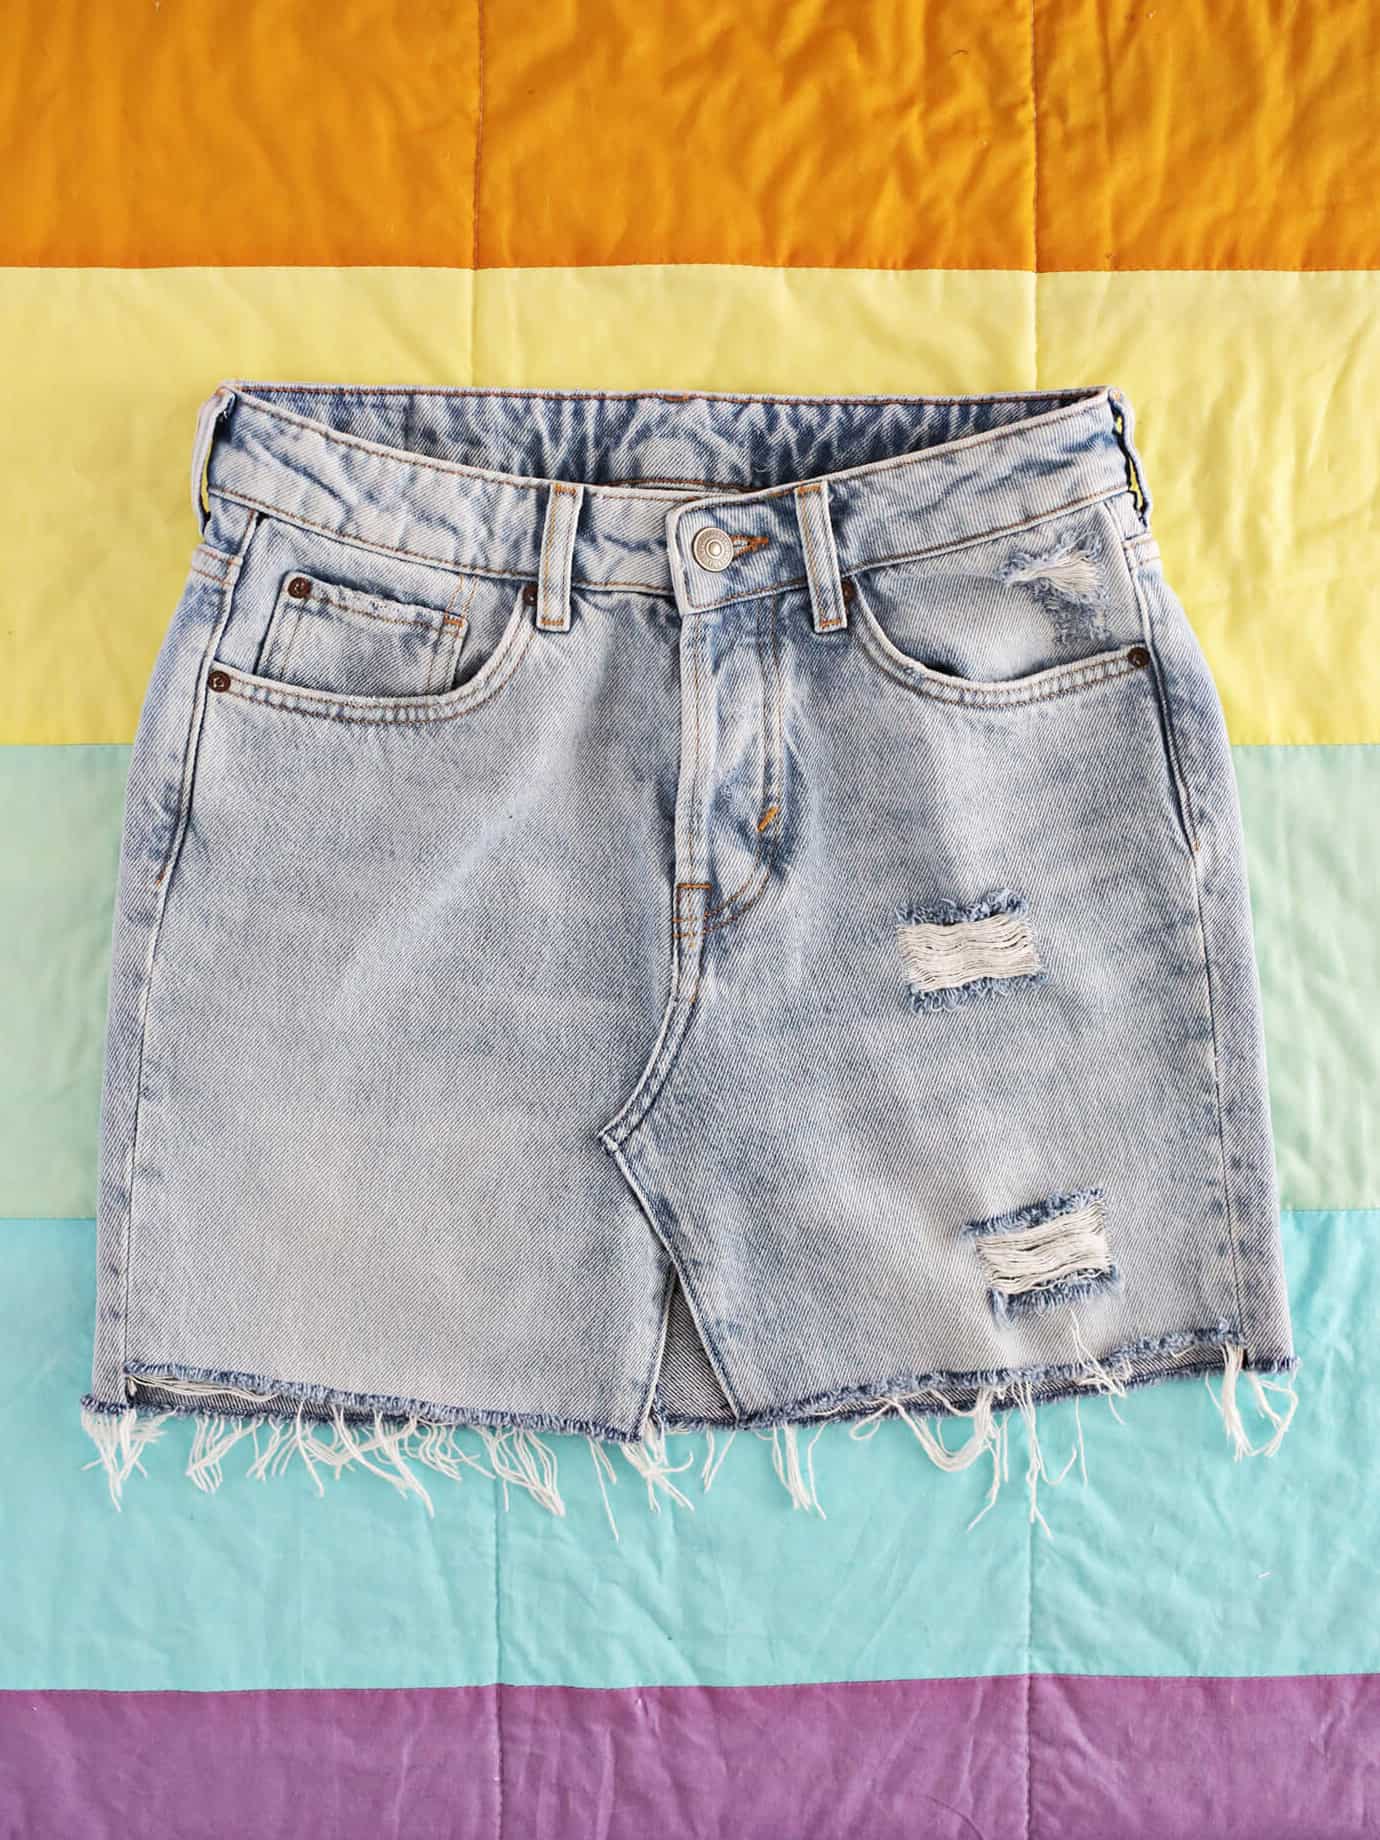 jean to skirt